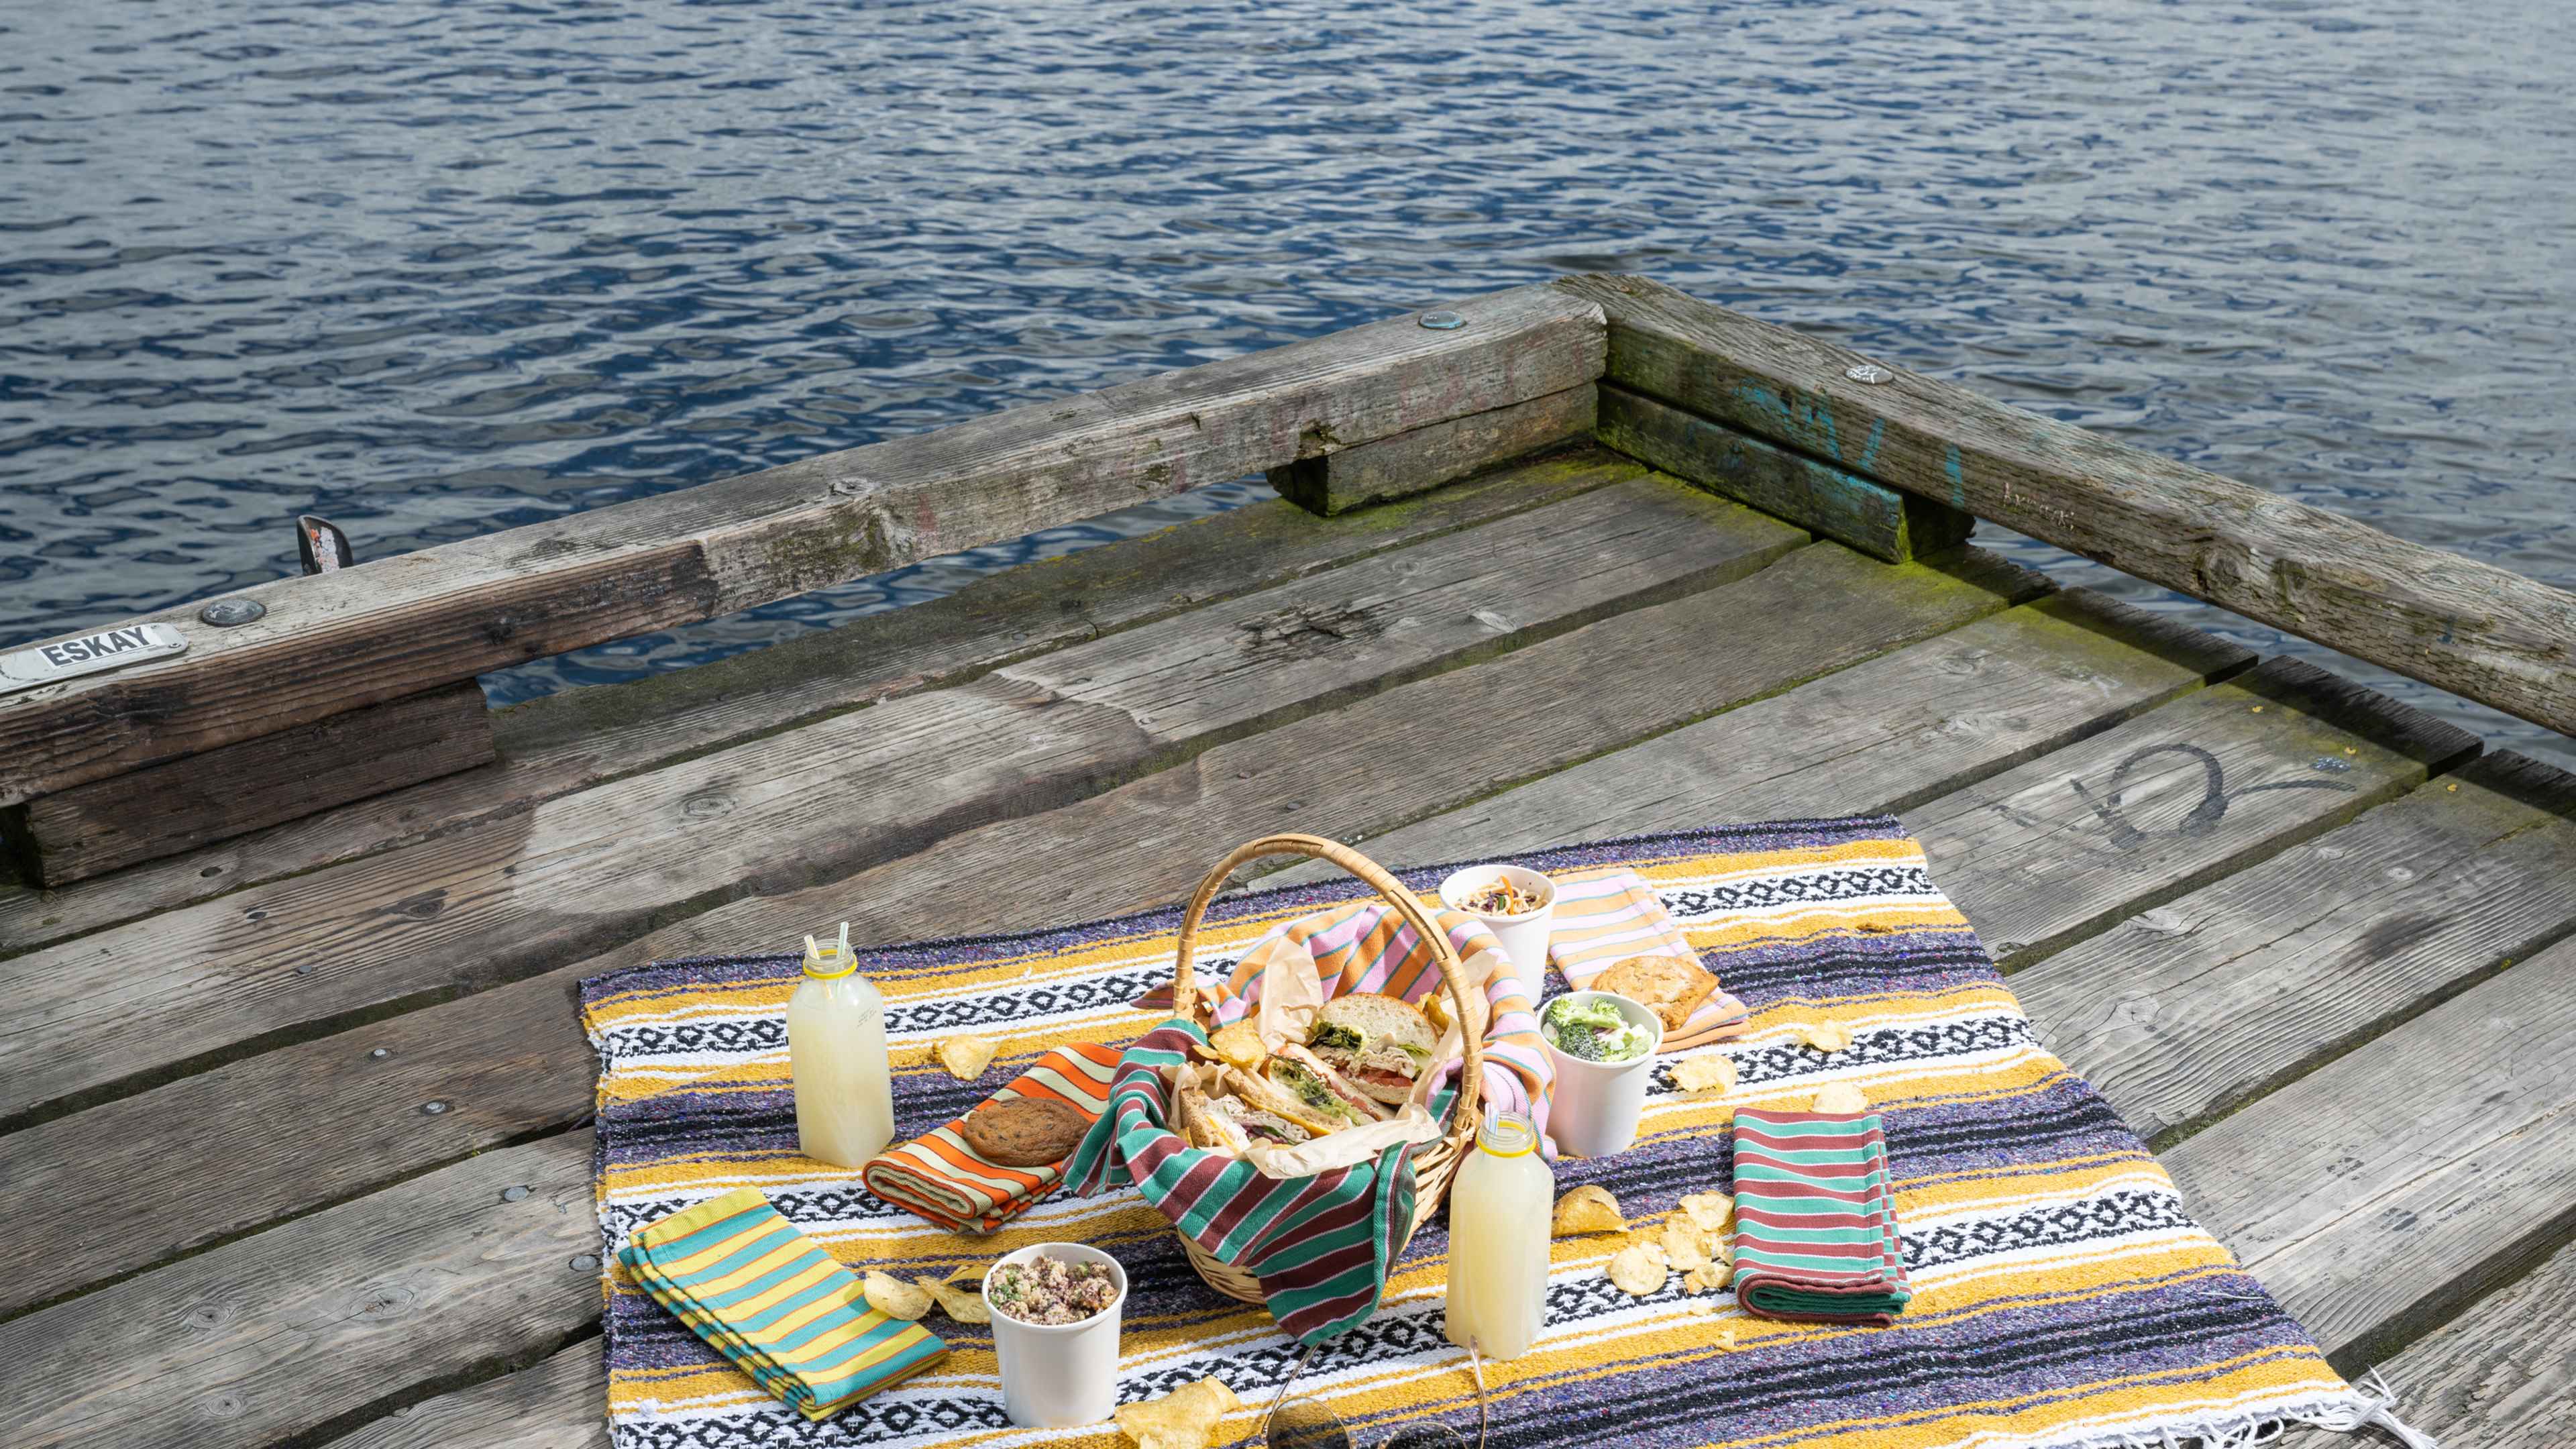 picnic blanket with drinks and sandwiches and colorful napkins on dock with water visible in background